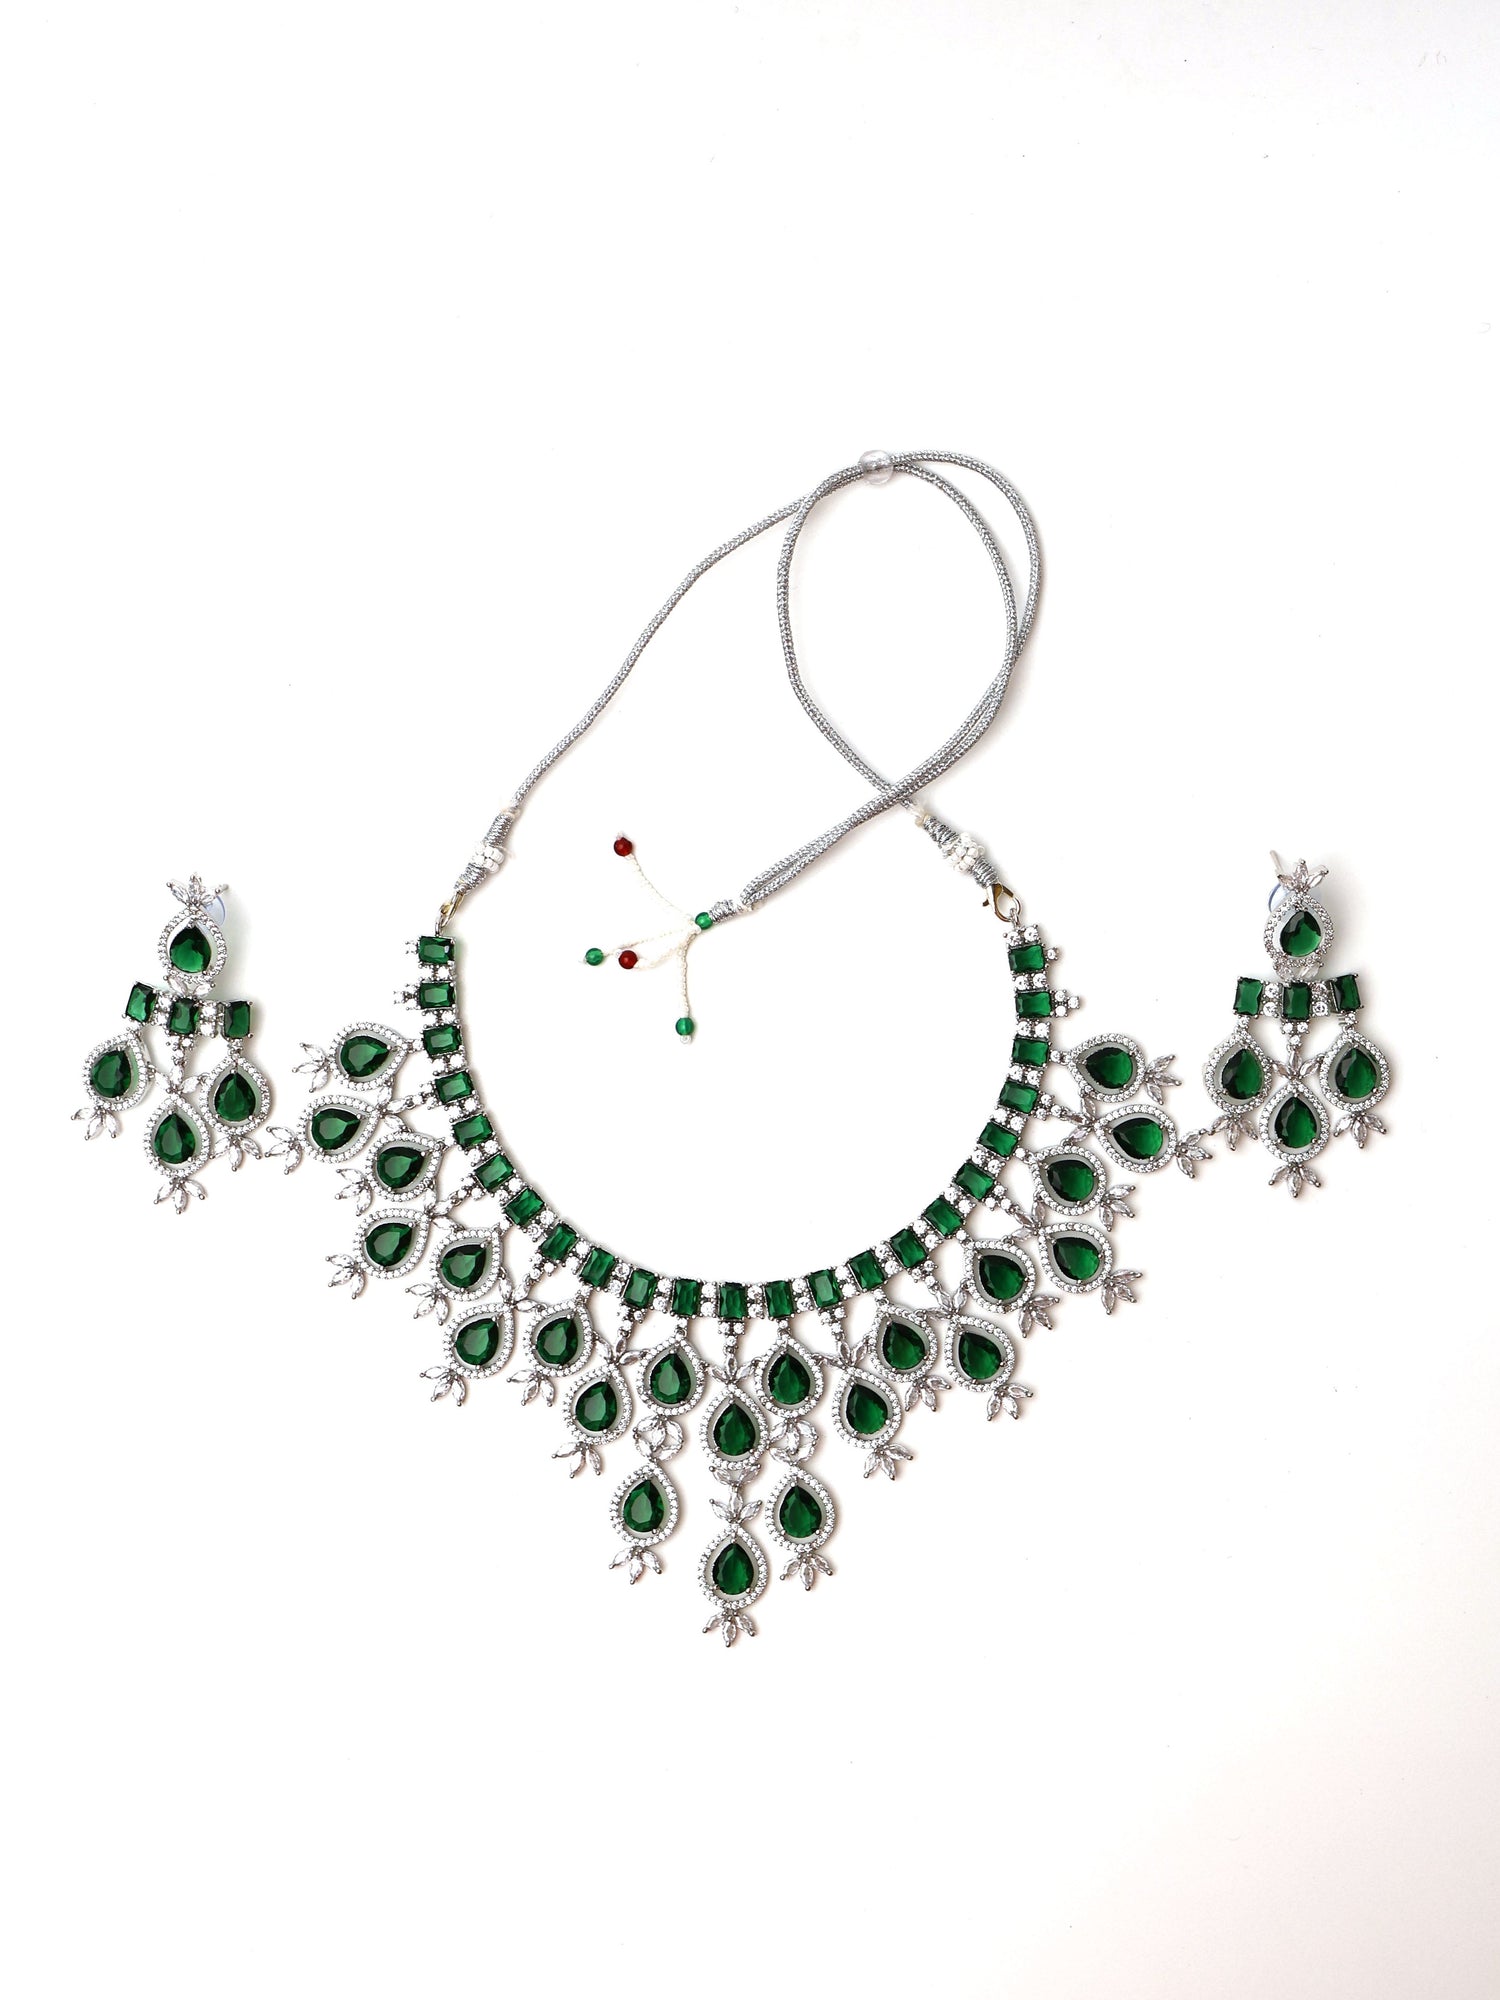 Green Stones Reverse AD Necklace Set with Earings Fashion Jewelry for Party Festival Wedding Occasion in Noida